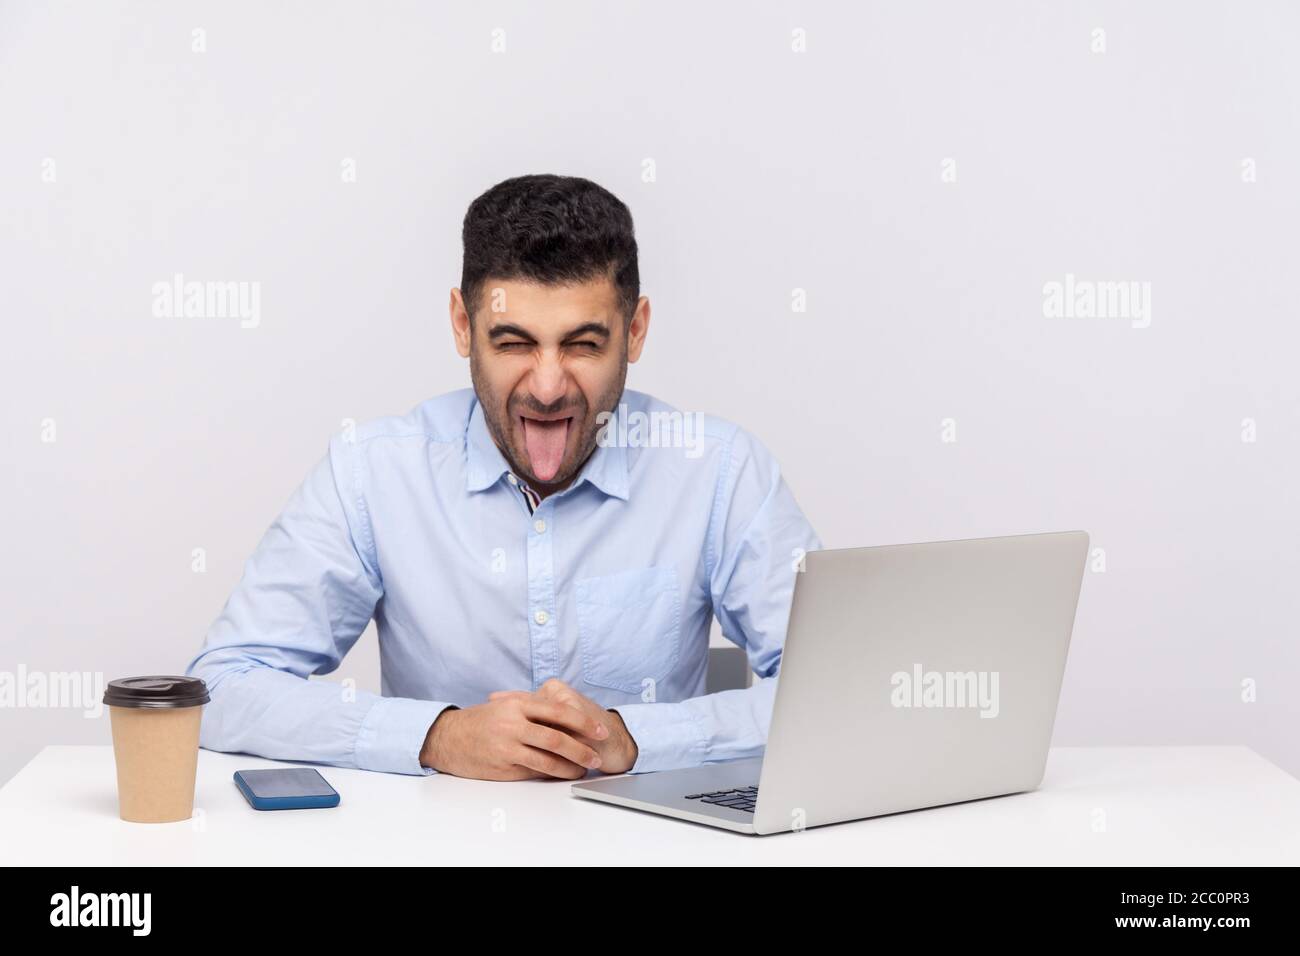 Crazy funny businessman sitting office workplace with laptop on desk, showing his tongue, looking at camera with naughty disobedient expression. indoo Stock Photo